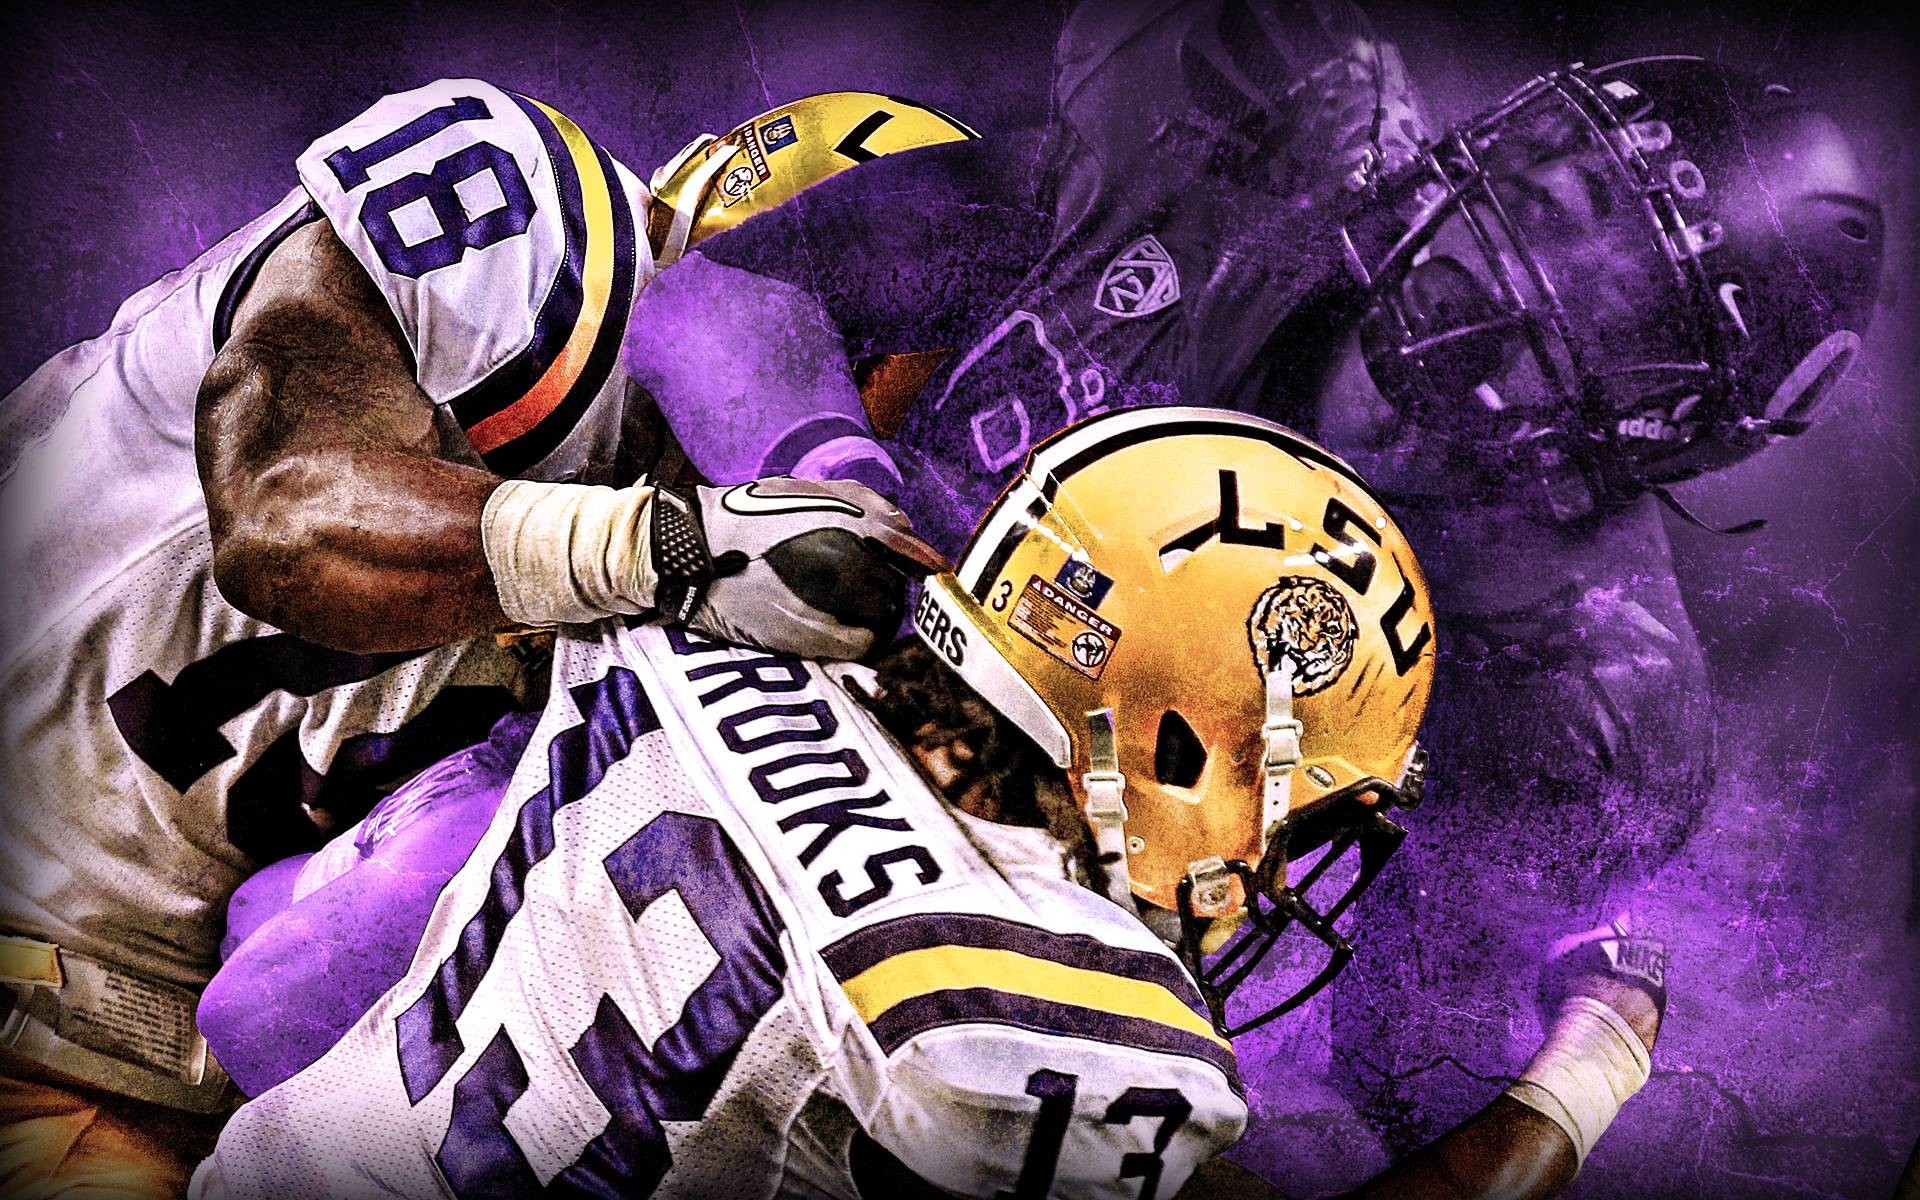 Lsu Tigers Wallpaper For Computer.